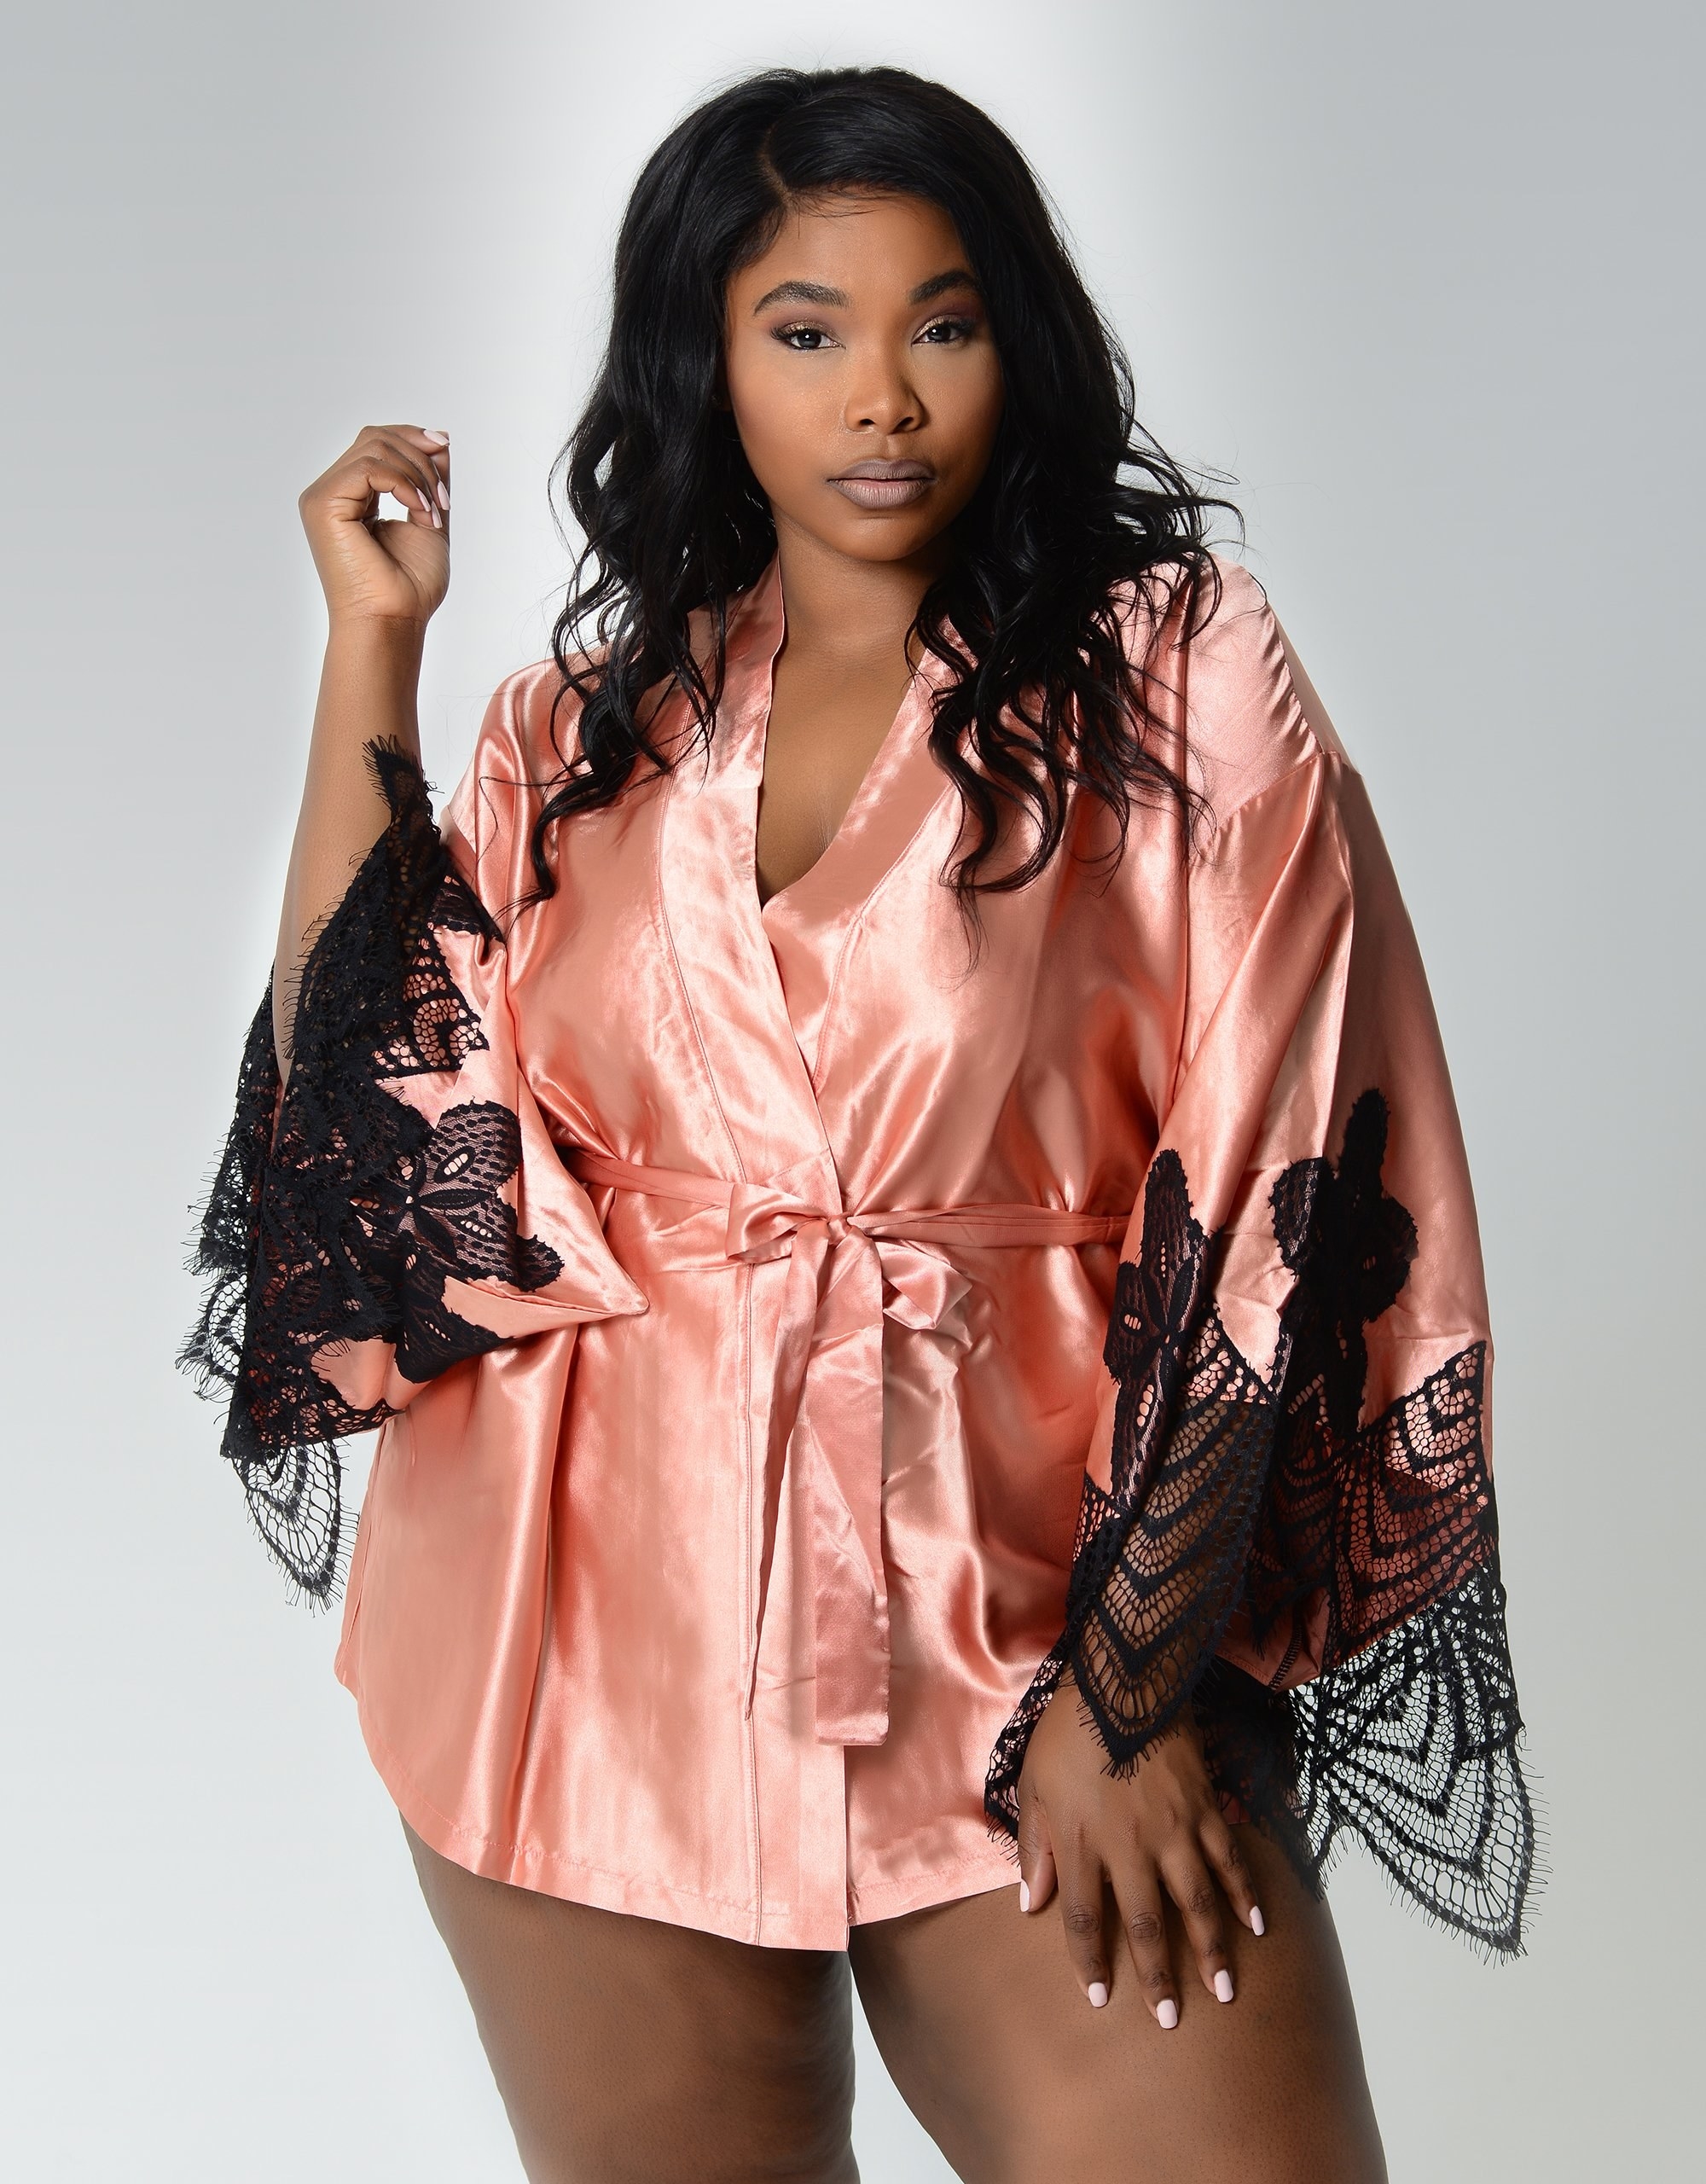 a model in a pink satin robe with black lace sleeve accents